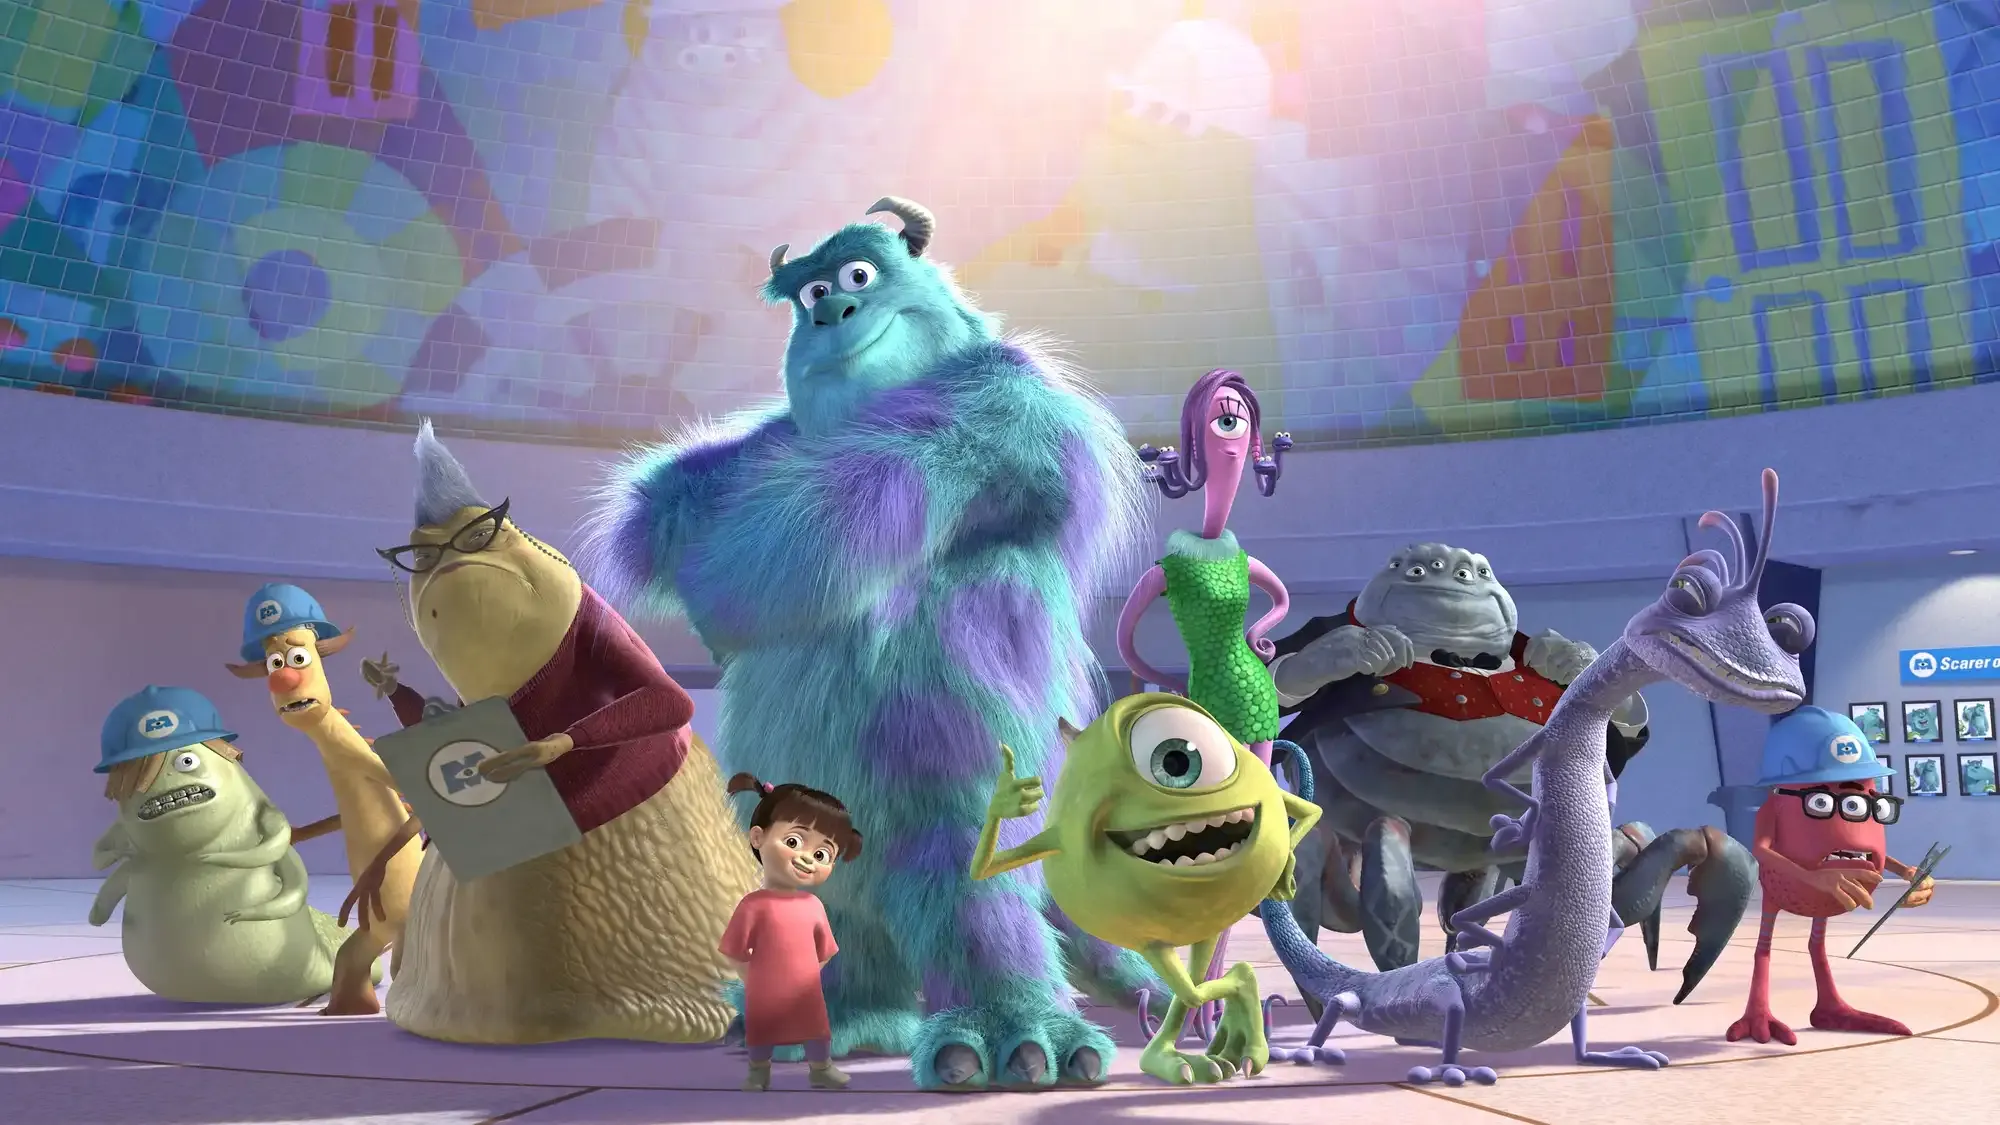 Monsters, Inc. movie review